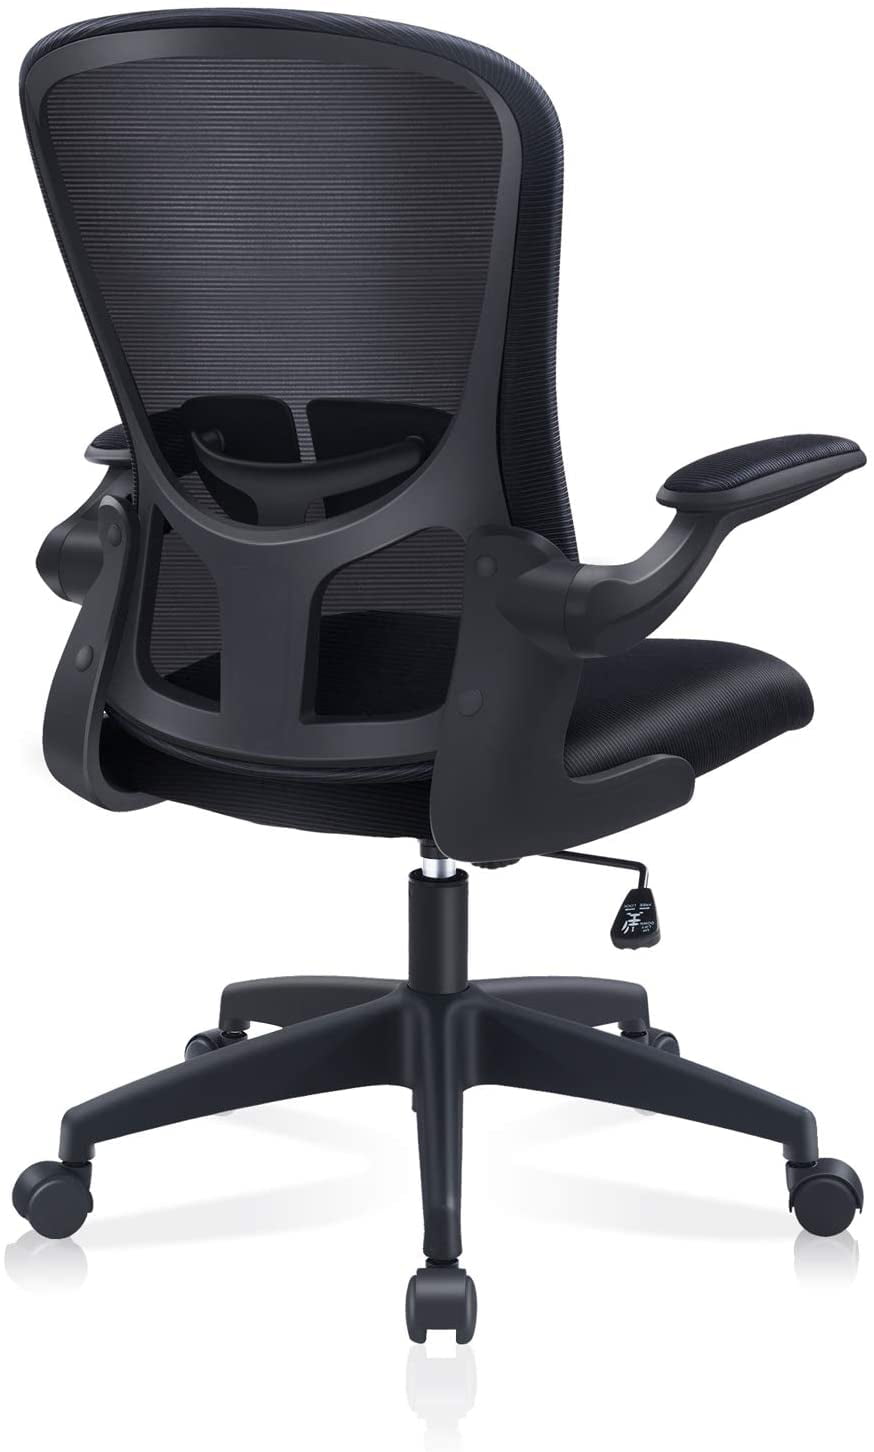 Office Chair, FelixKing Ergonomic Desk Chair with Adjustable Height